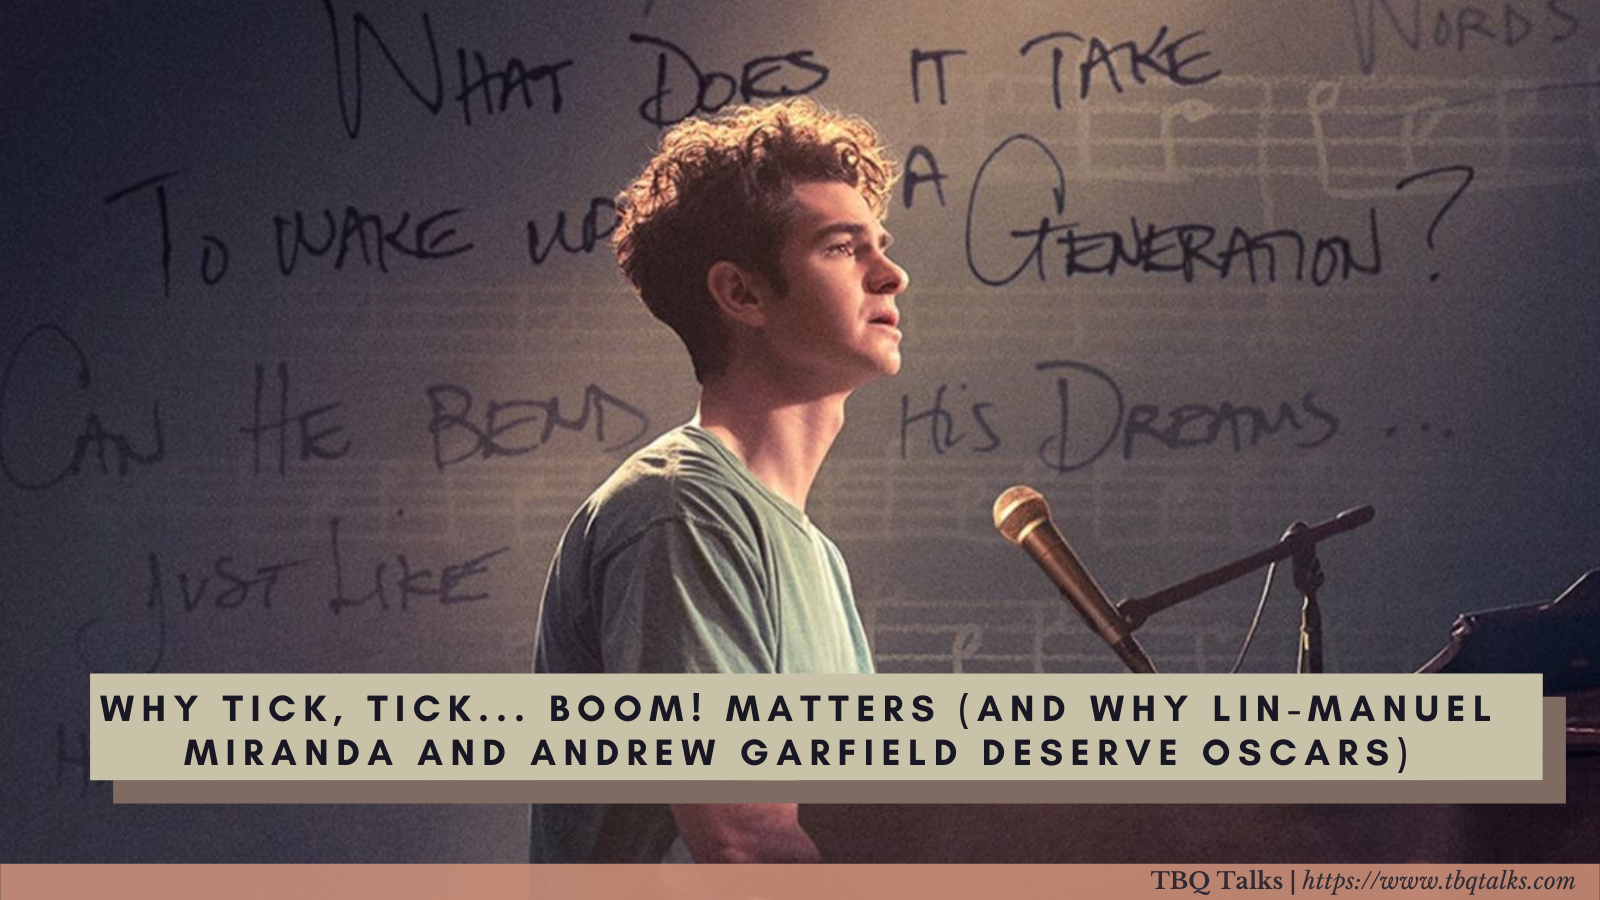 Why Tick, Tick... Boom! Matters And Why Lin-Manuel Miranda and Andrew Garfield Deserve Oscars